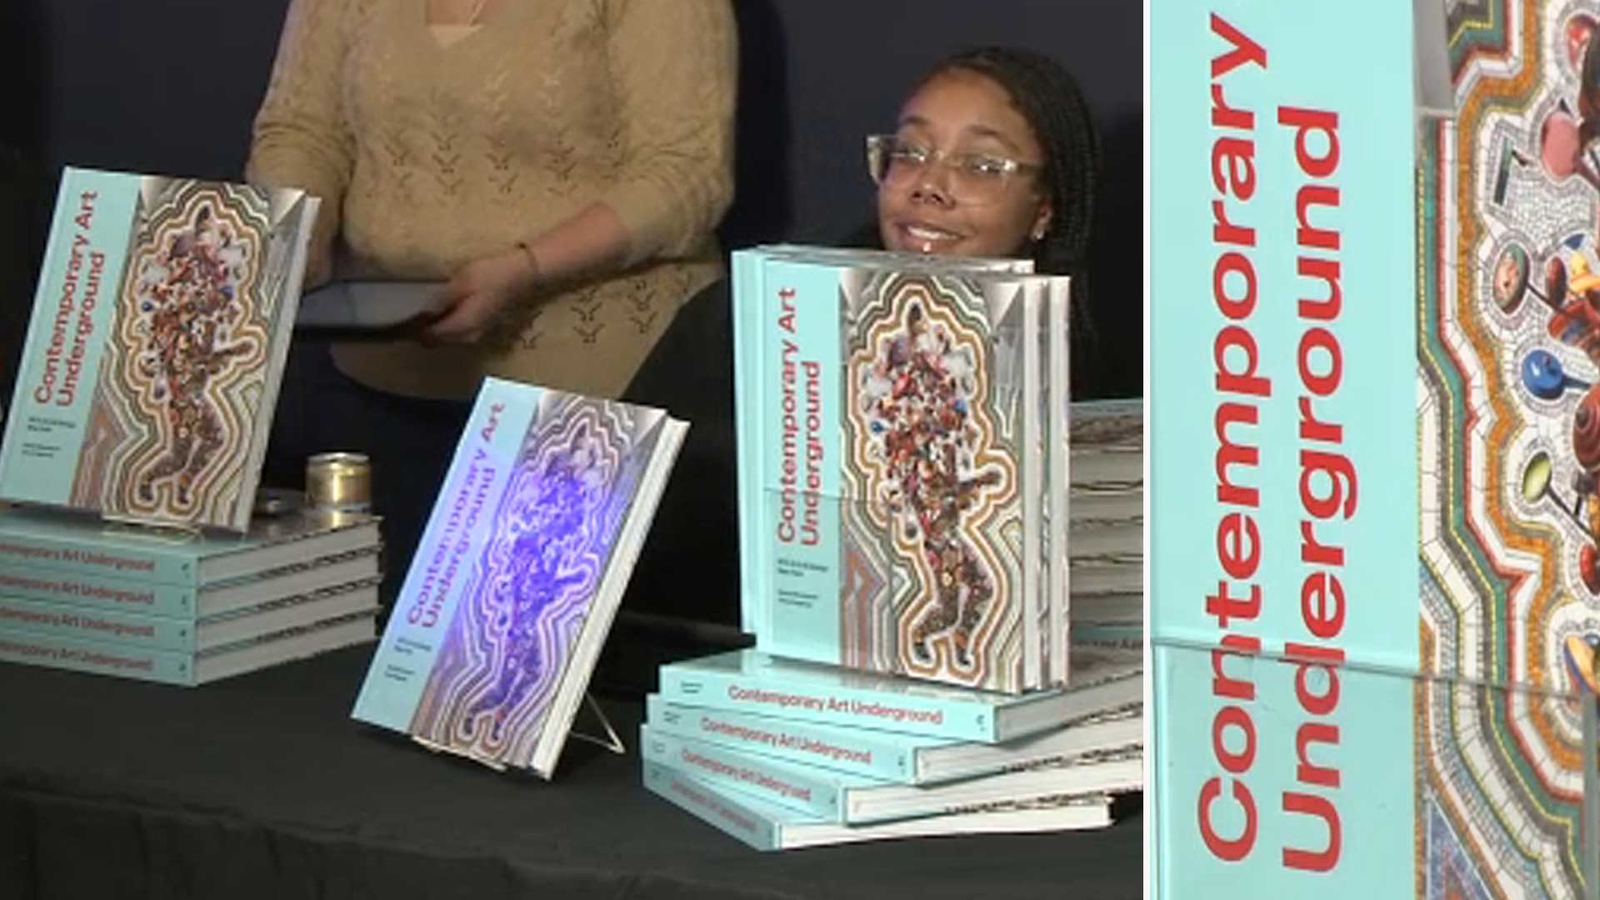 MTA subway art featured in new book called Contemporary Art Underground [Video]